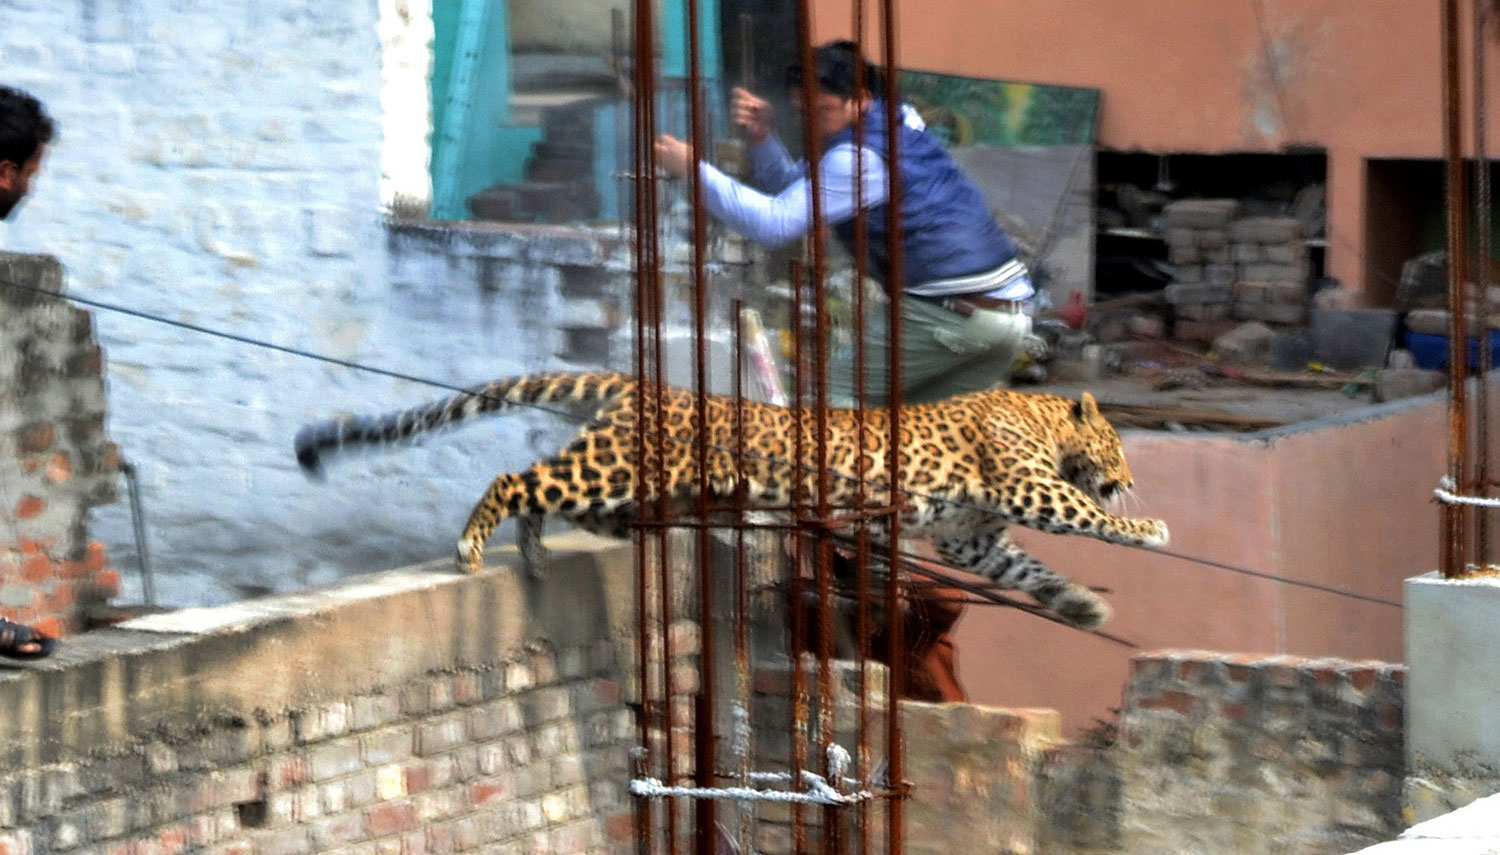 The leopard leaps across an under-construction structure near a furniture market in the Degumpur residential area of Meerut